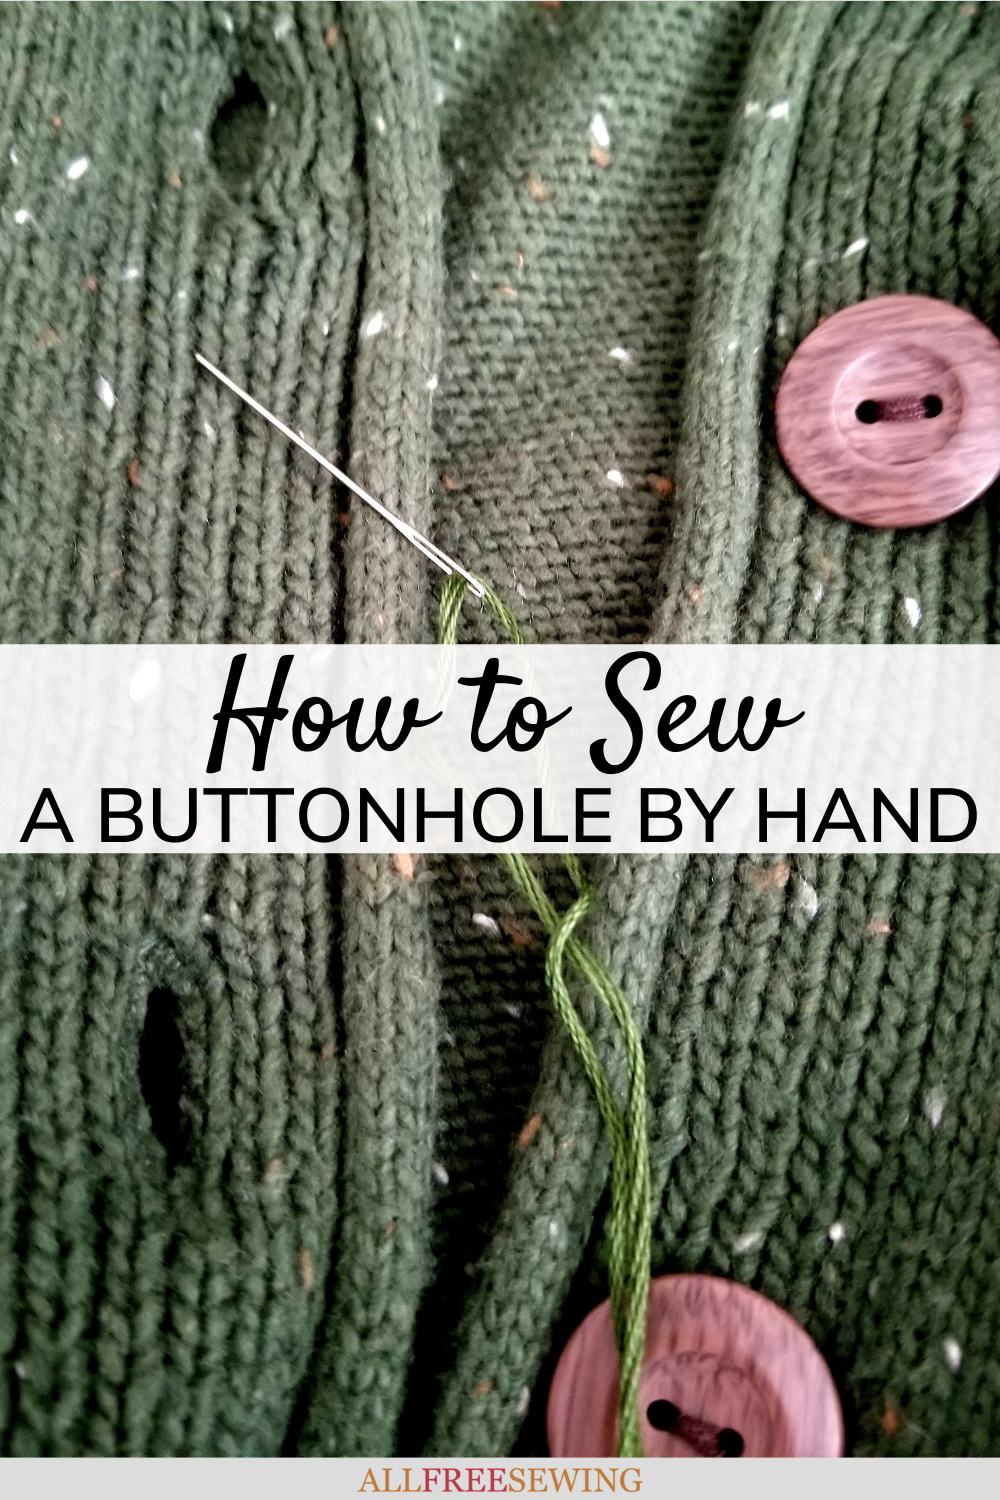 How to Sew With Yarn